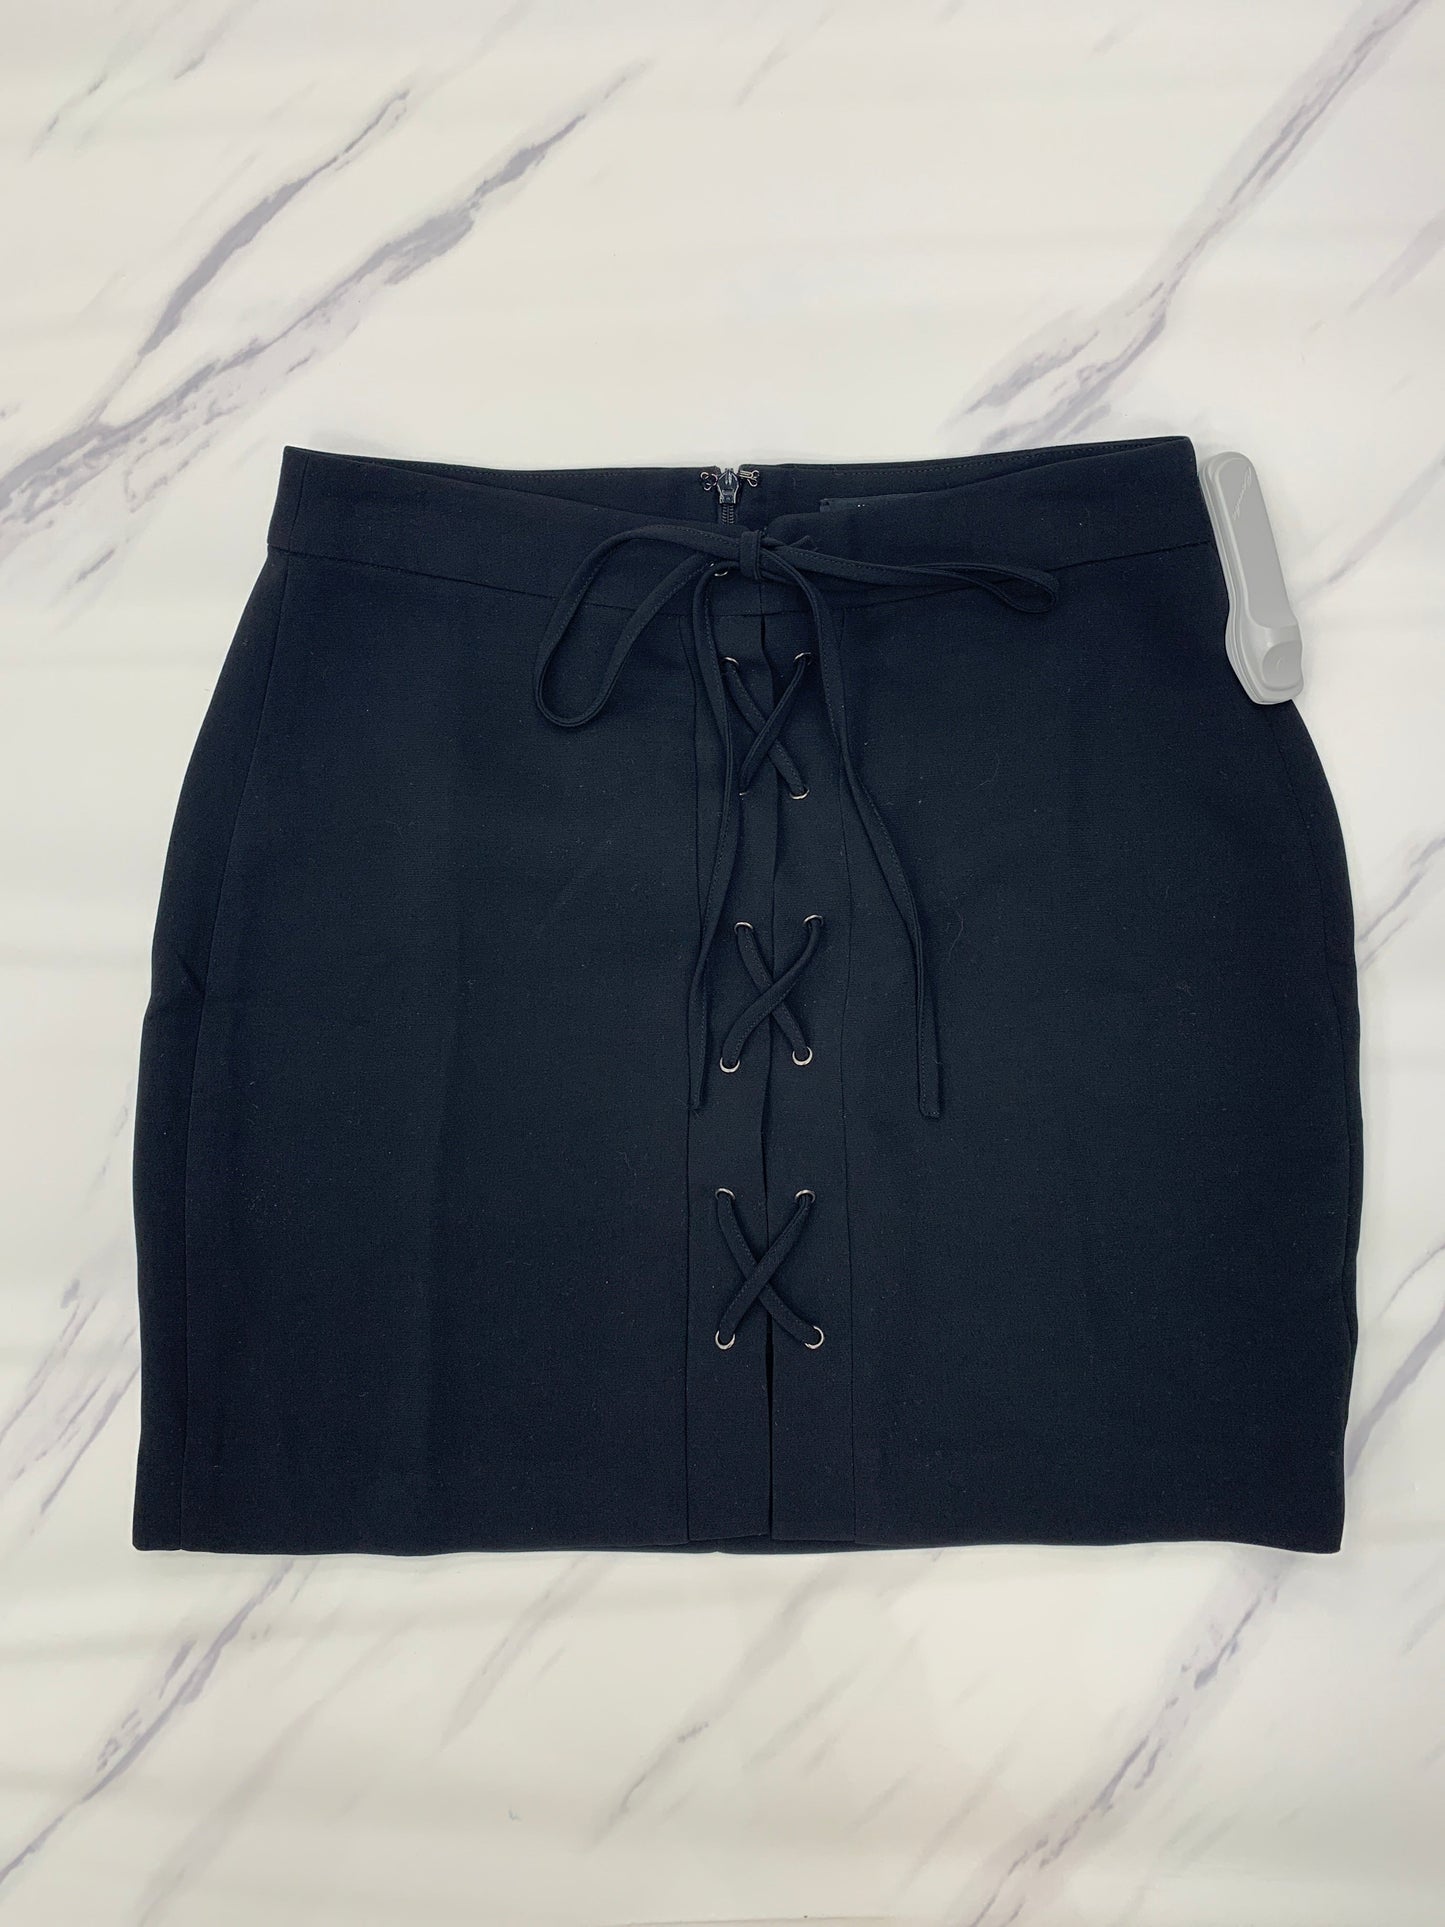 Skirt Mini & Short By Madewell  Size: 2